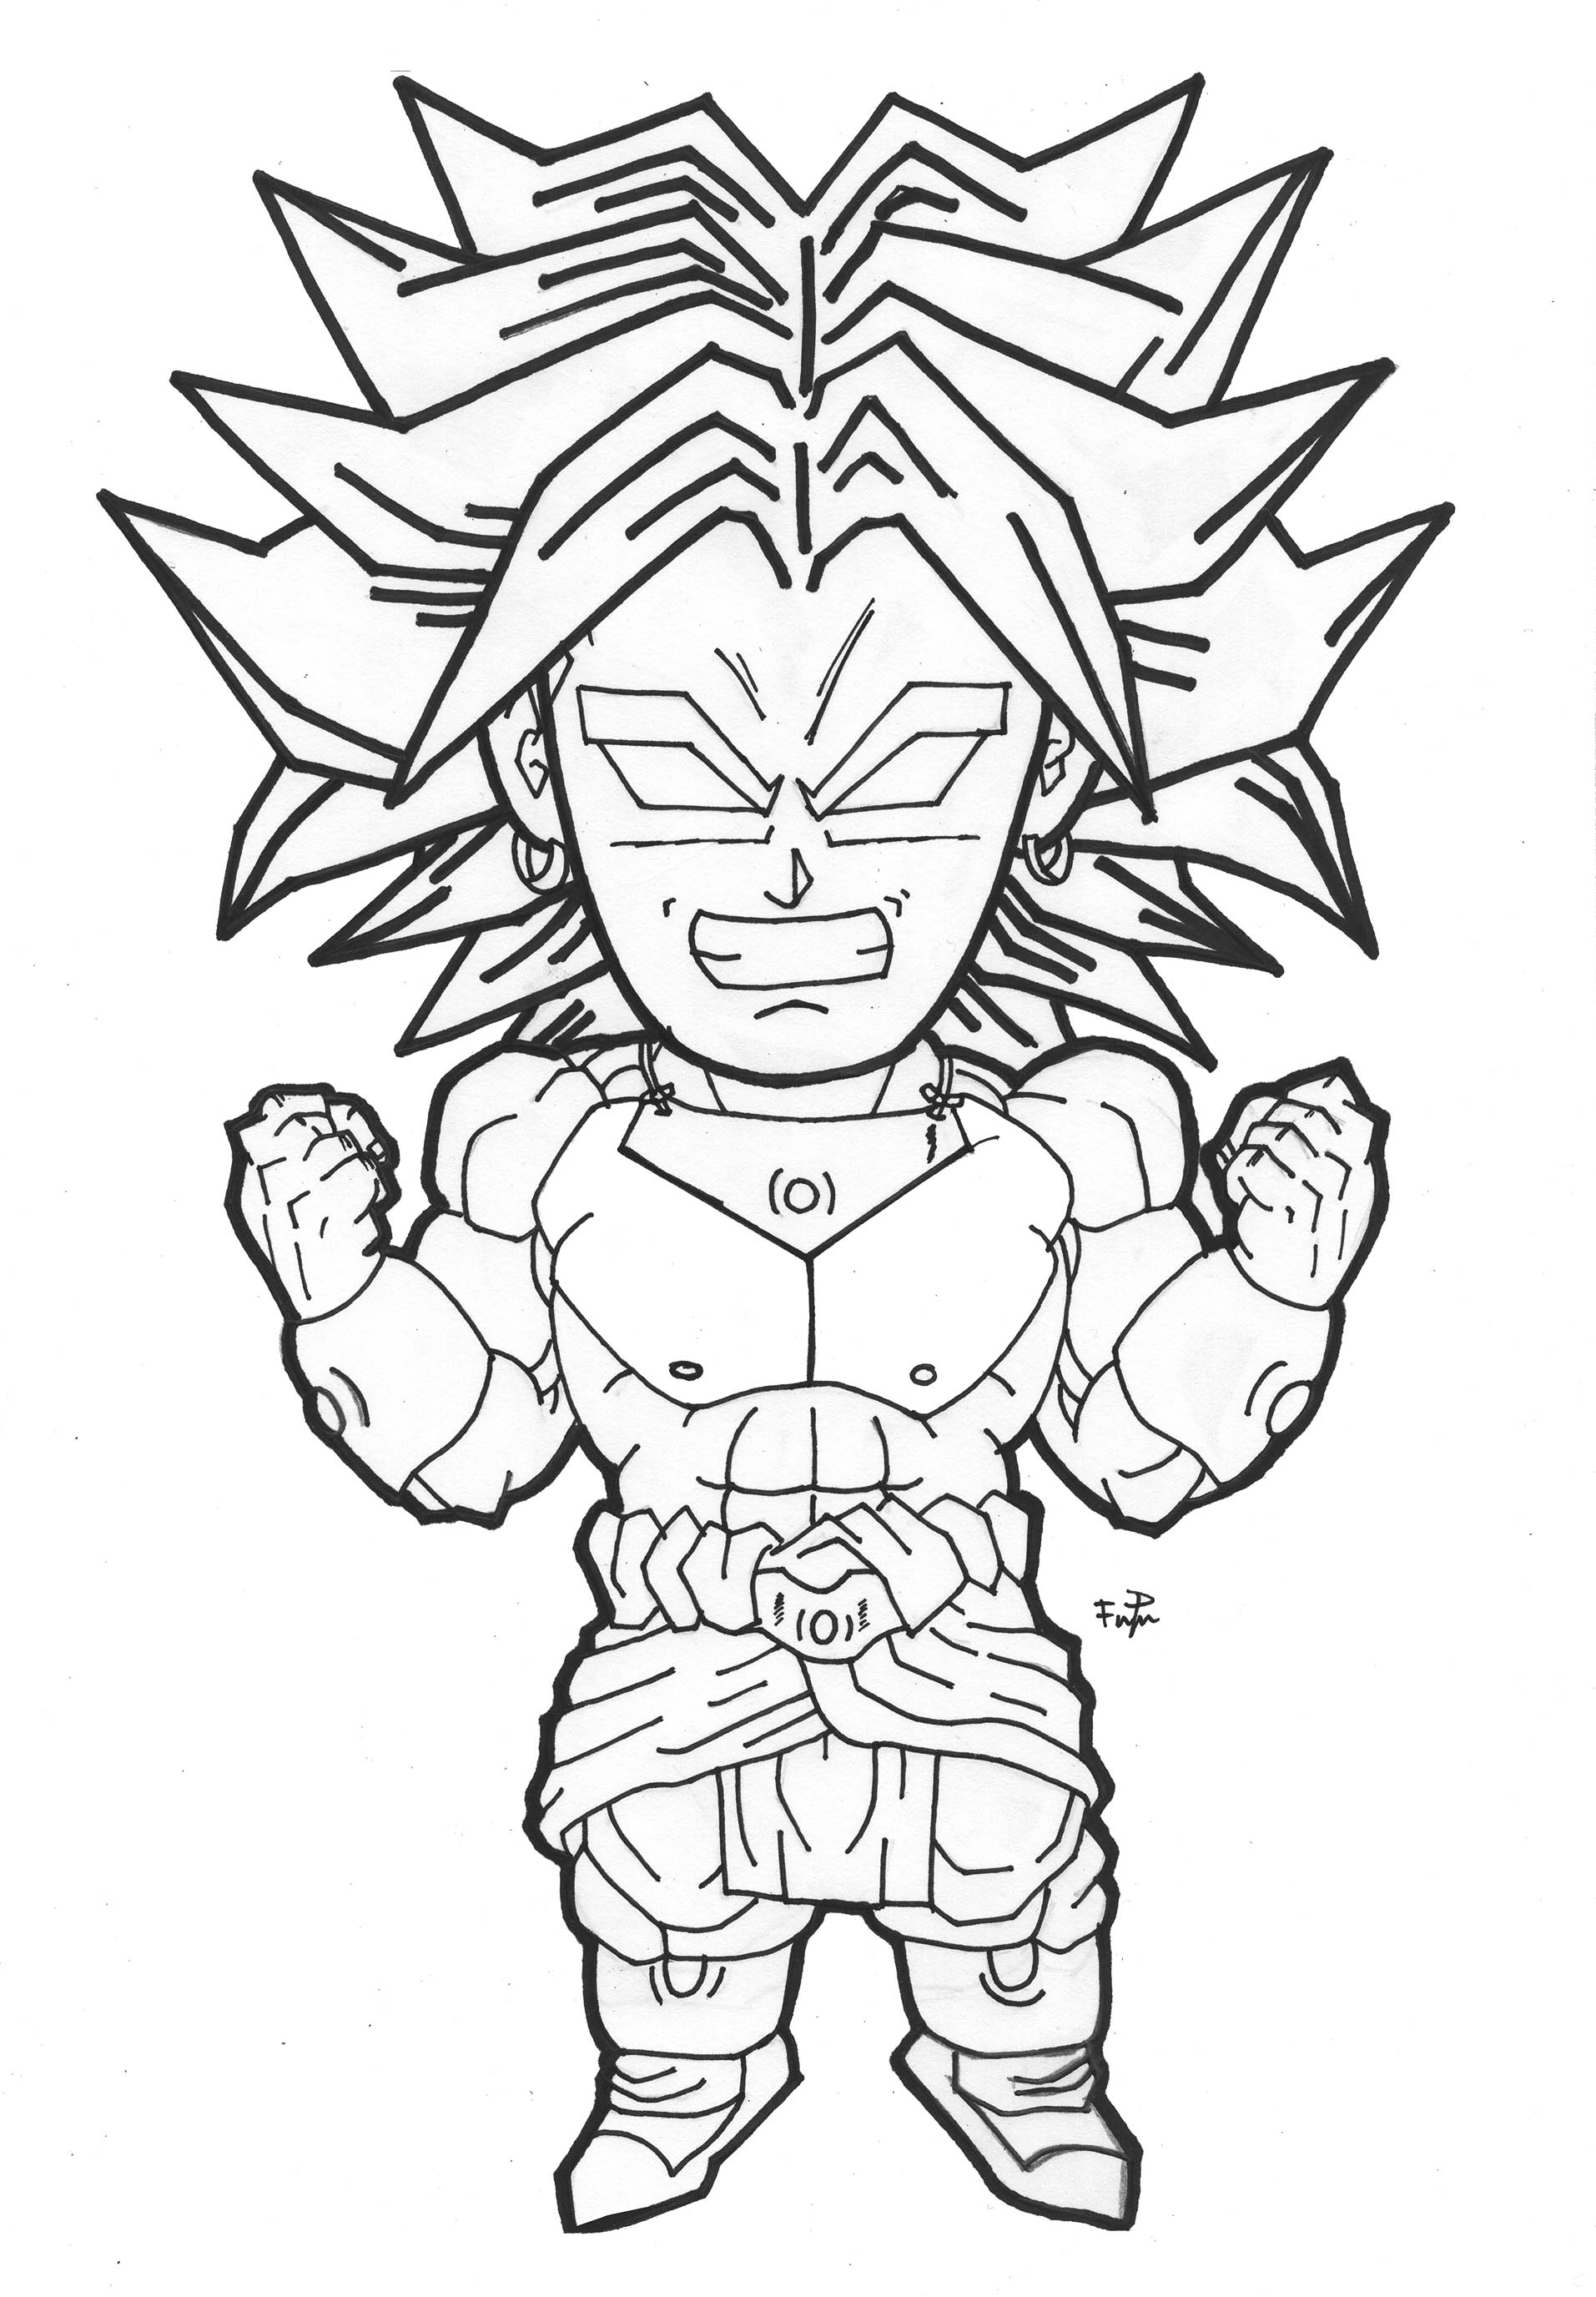 Dragon Ball Z coloring page with few details for kids : Broly Super Saiyajin